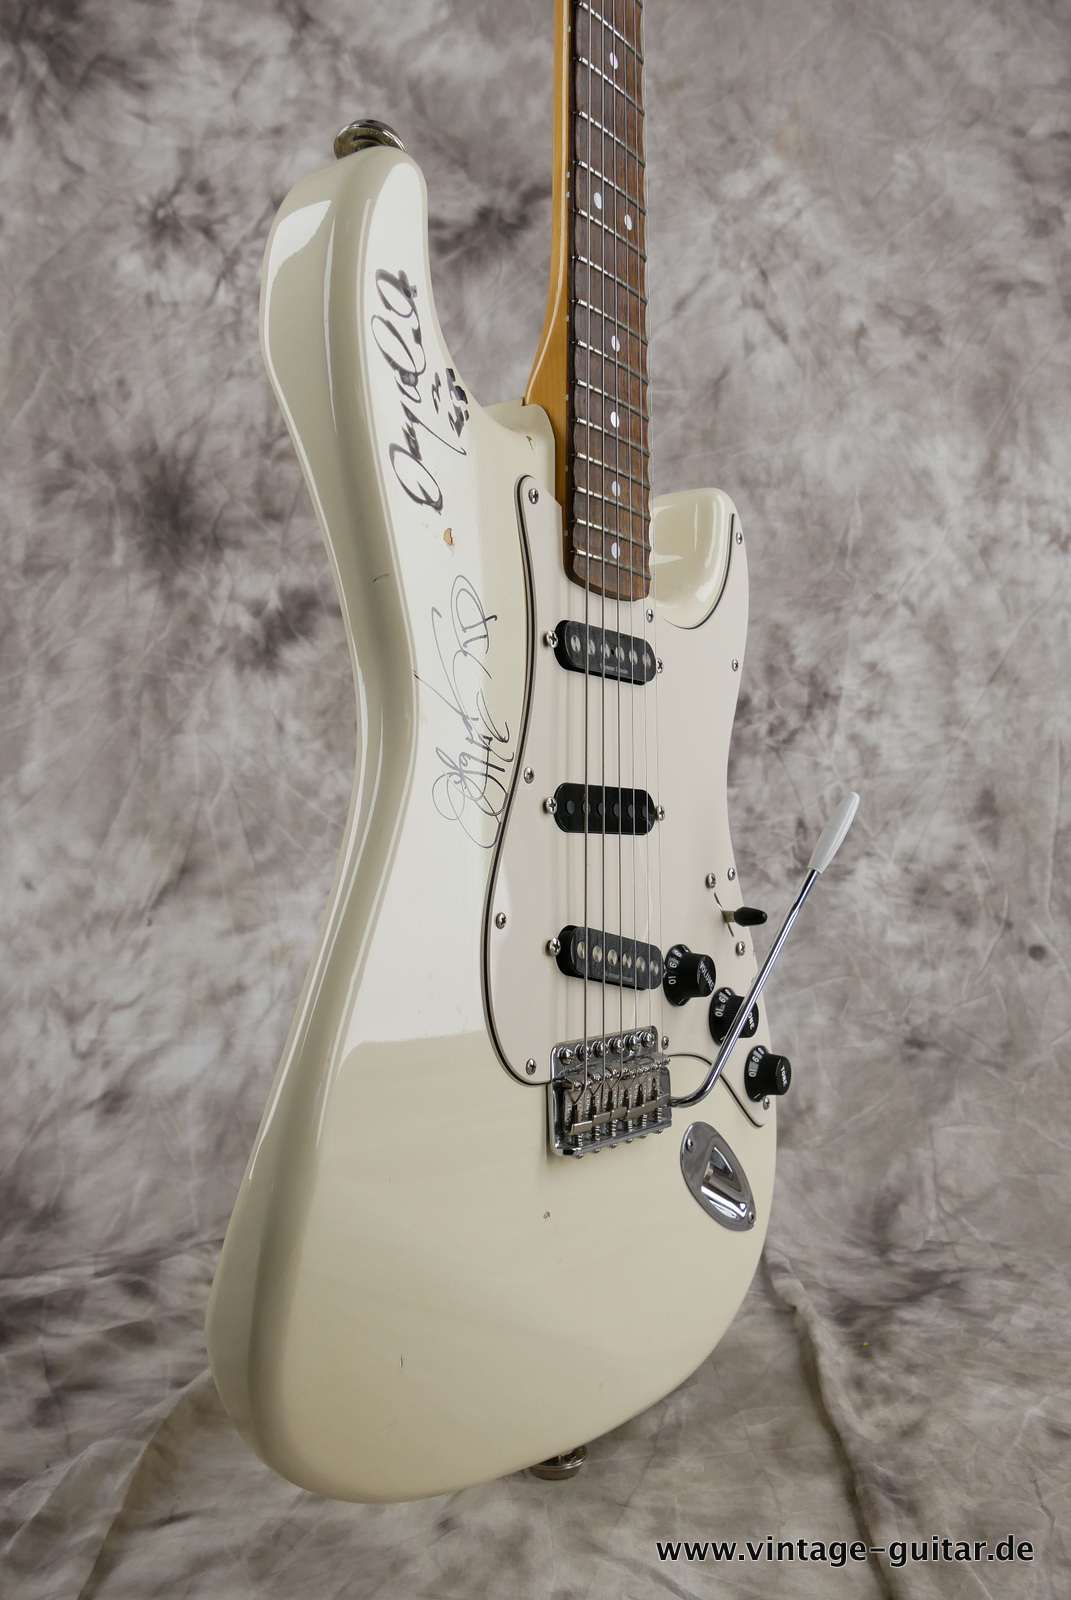 img/vintage/5217/Fender_Strat_Stratocaster_Ritchie_Blackmore_ST-72RB_madeinjapan_1997_olympic_white_singed_scalloped_fretboard-005.JPG